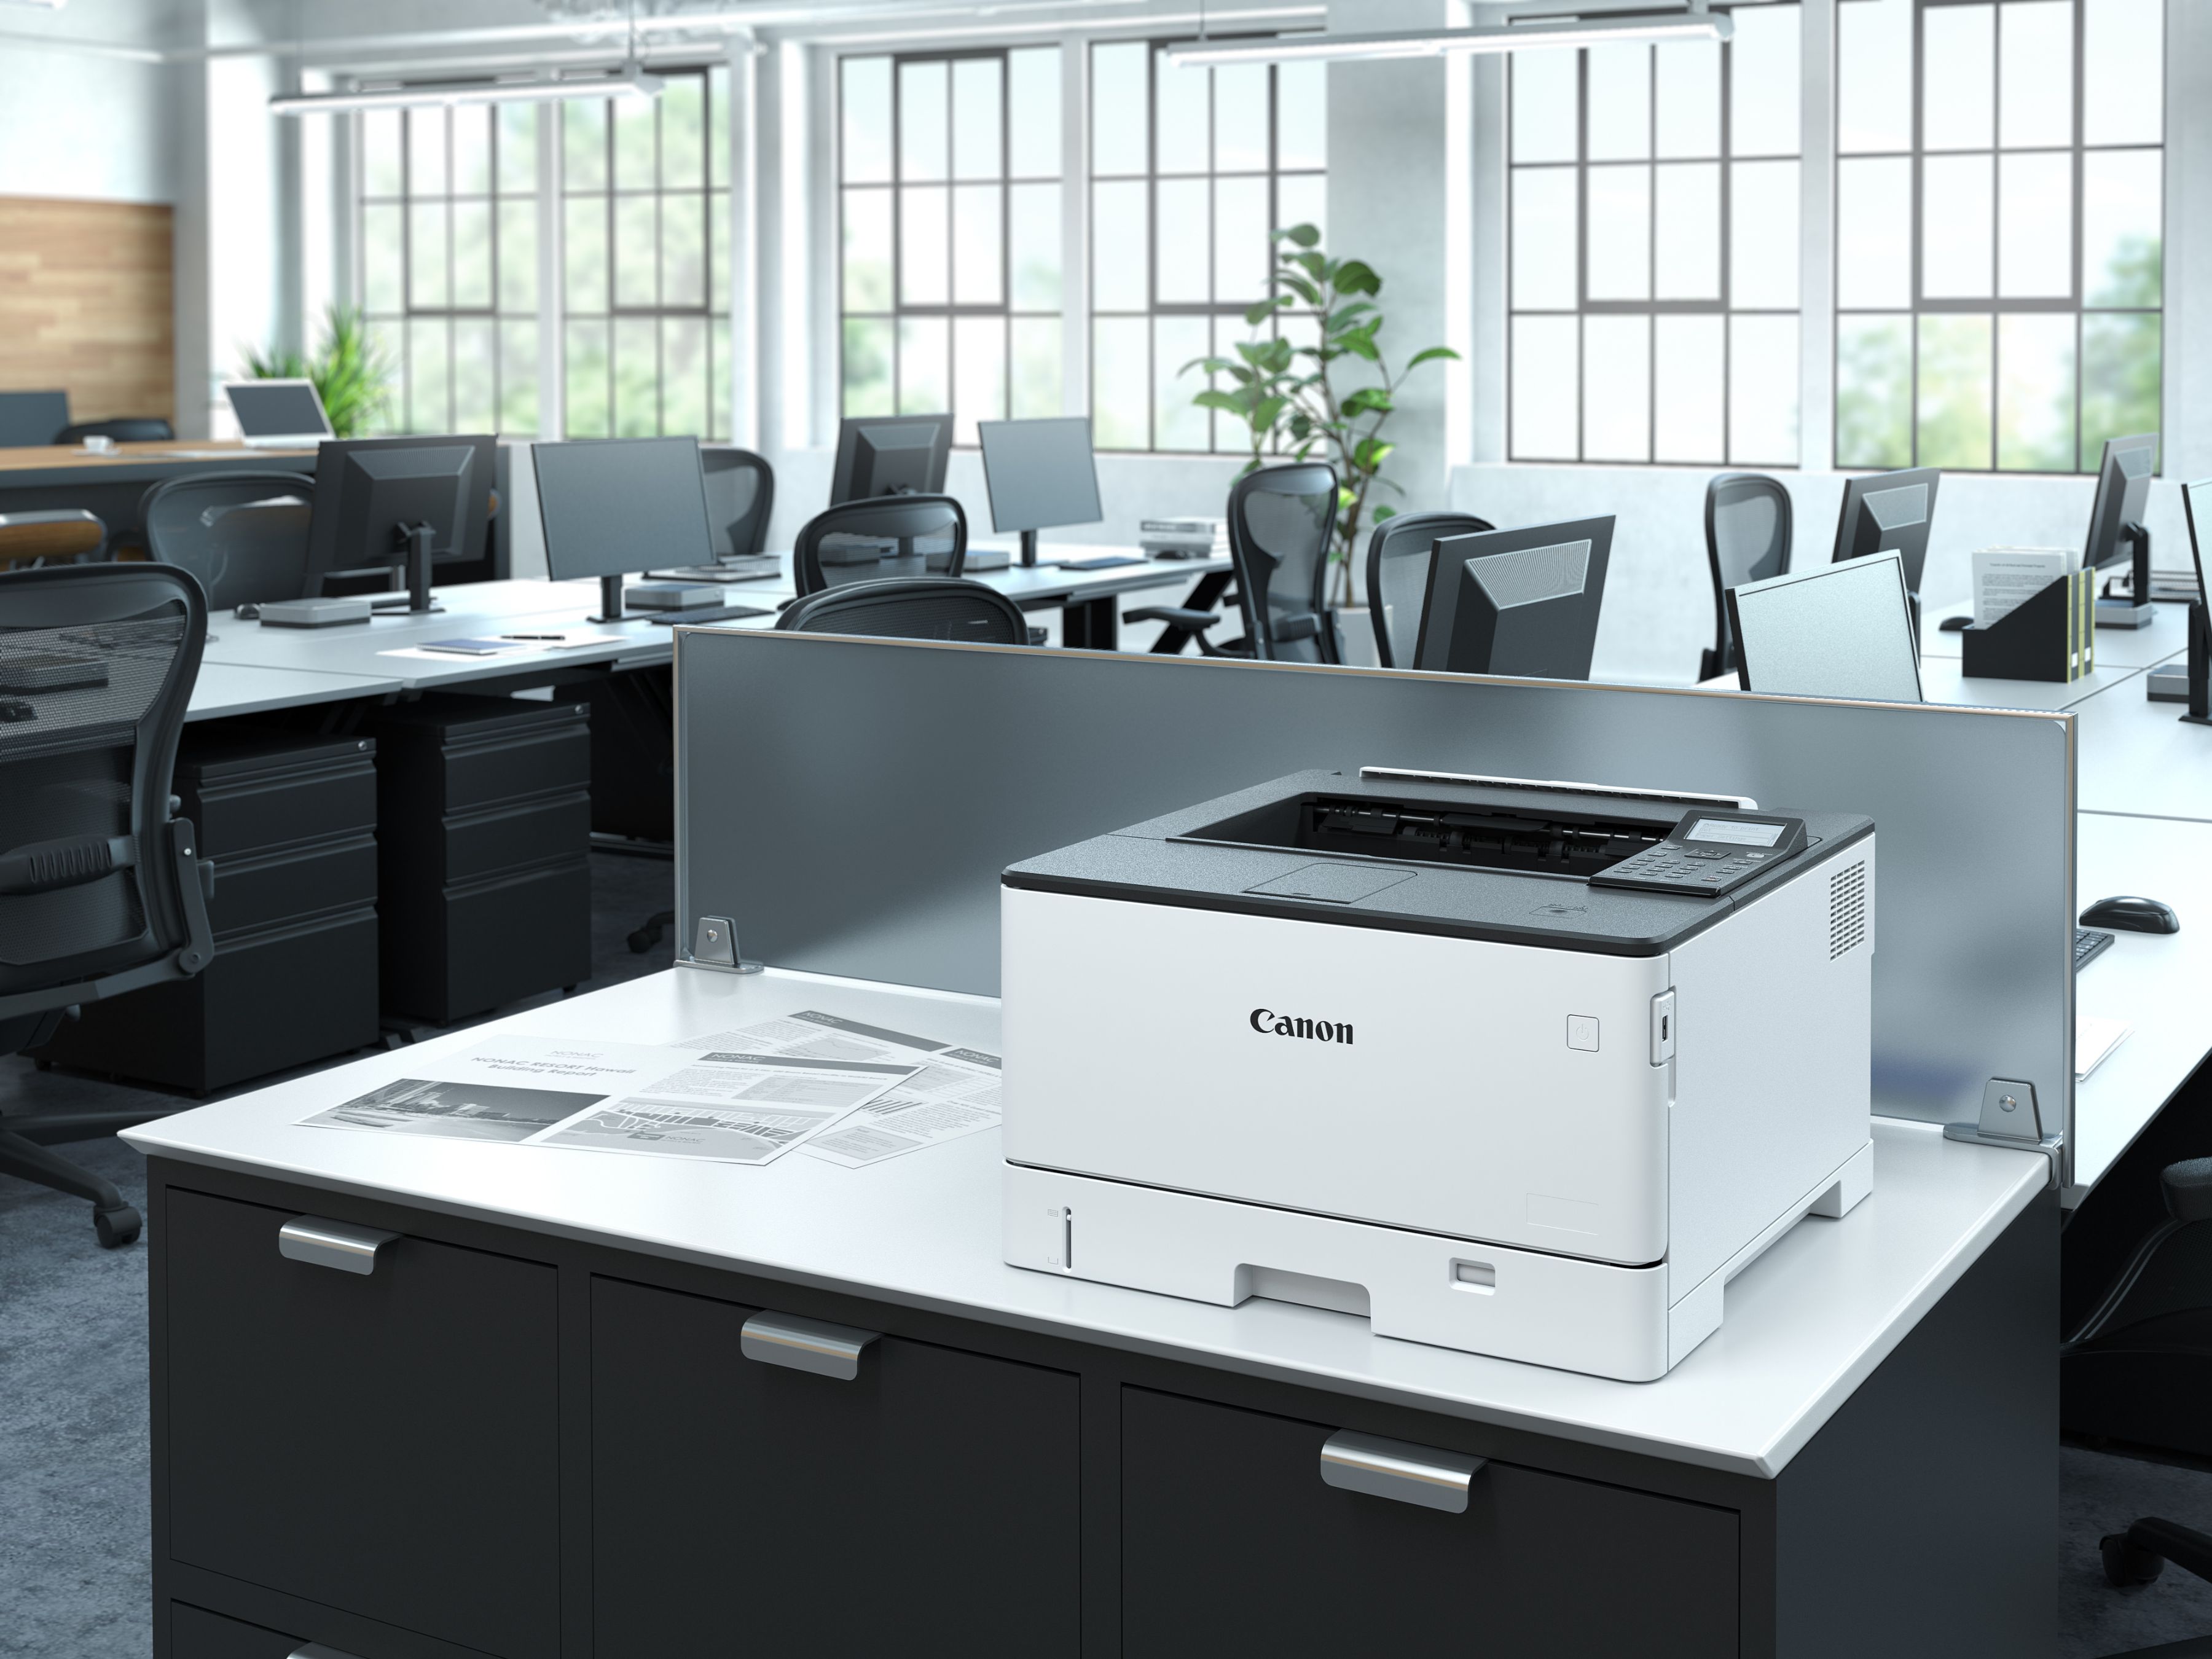 How to Install Canon i-SENSYS LBP-Series Printer on GNU/Linux Distros - Featured